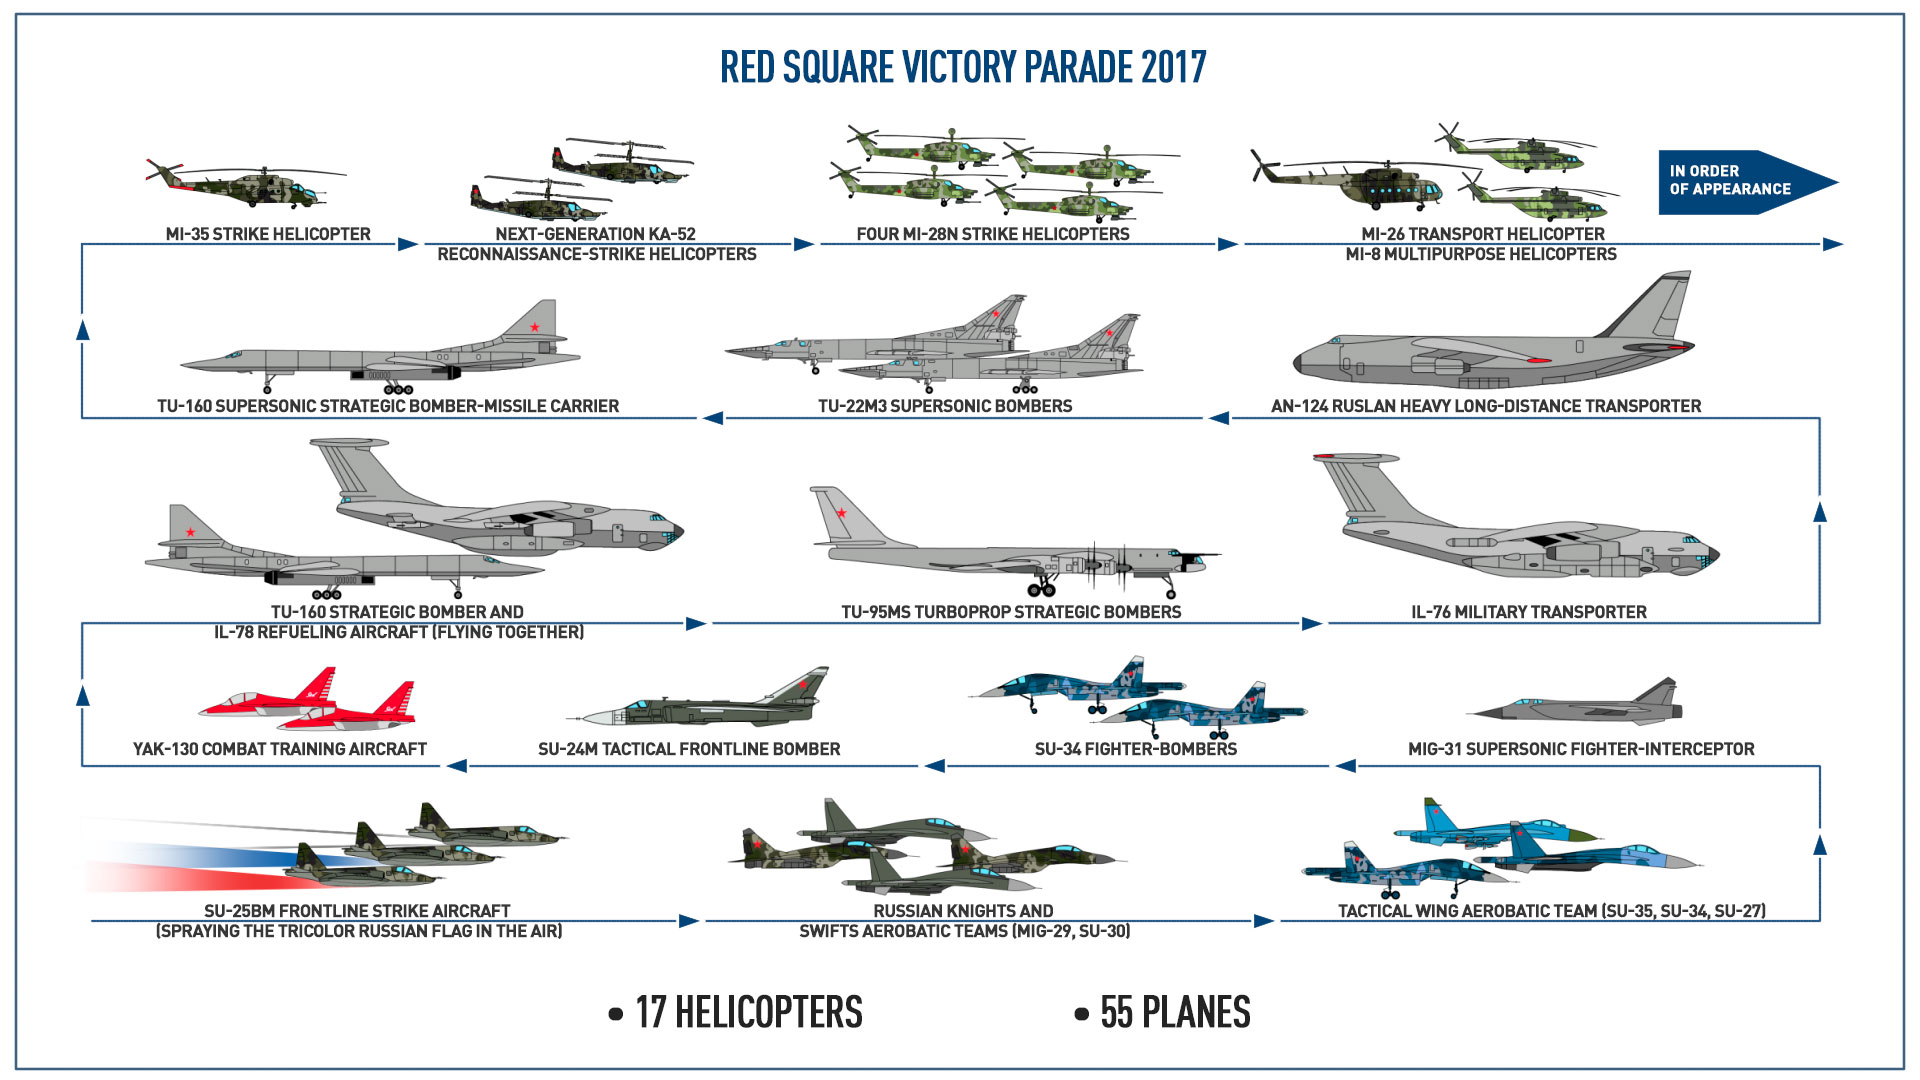 What type of aircraft will fly over Red Square?